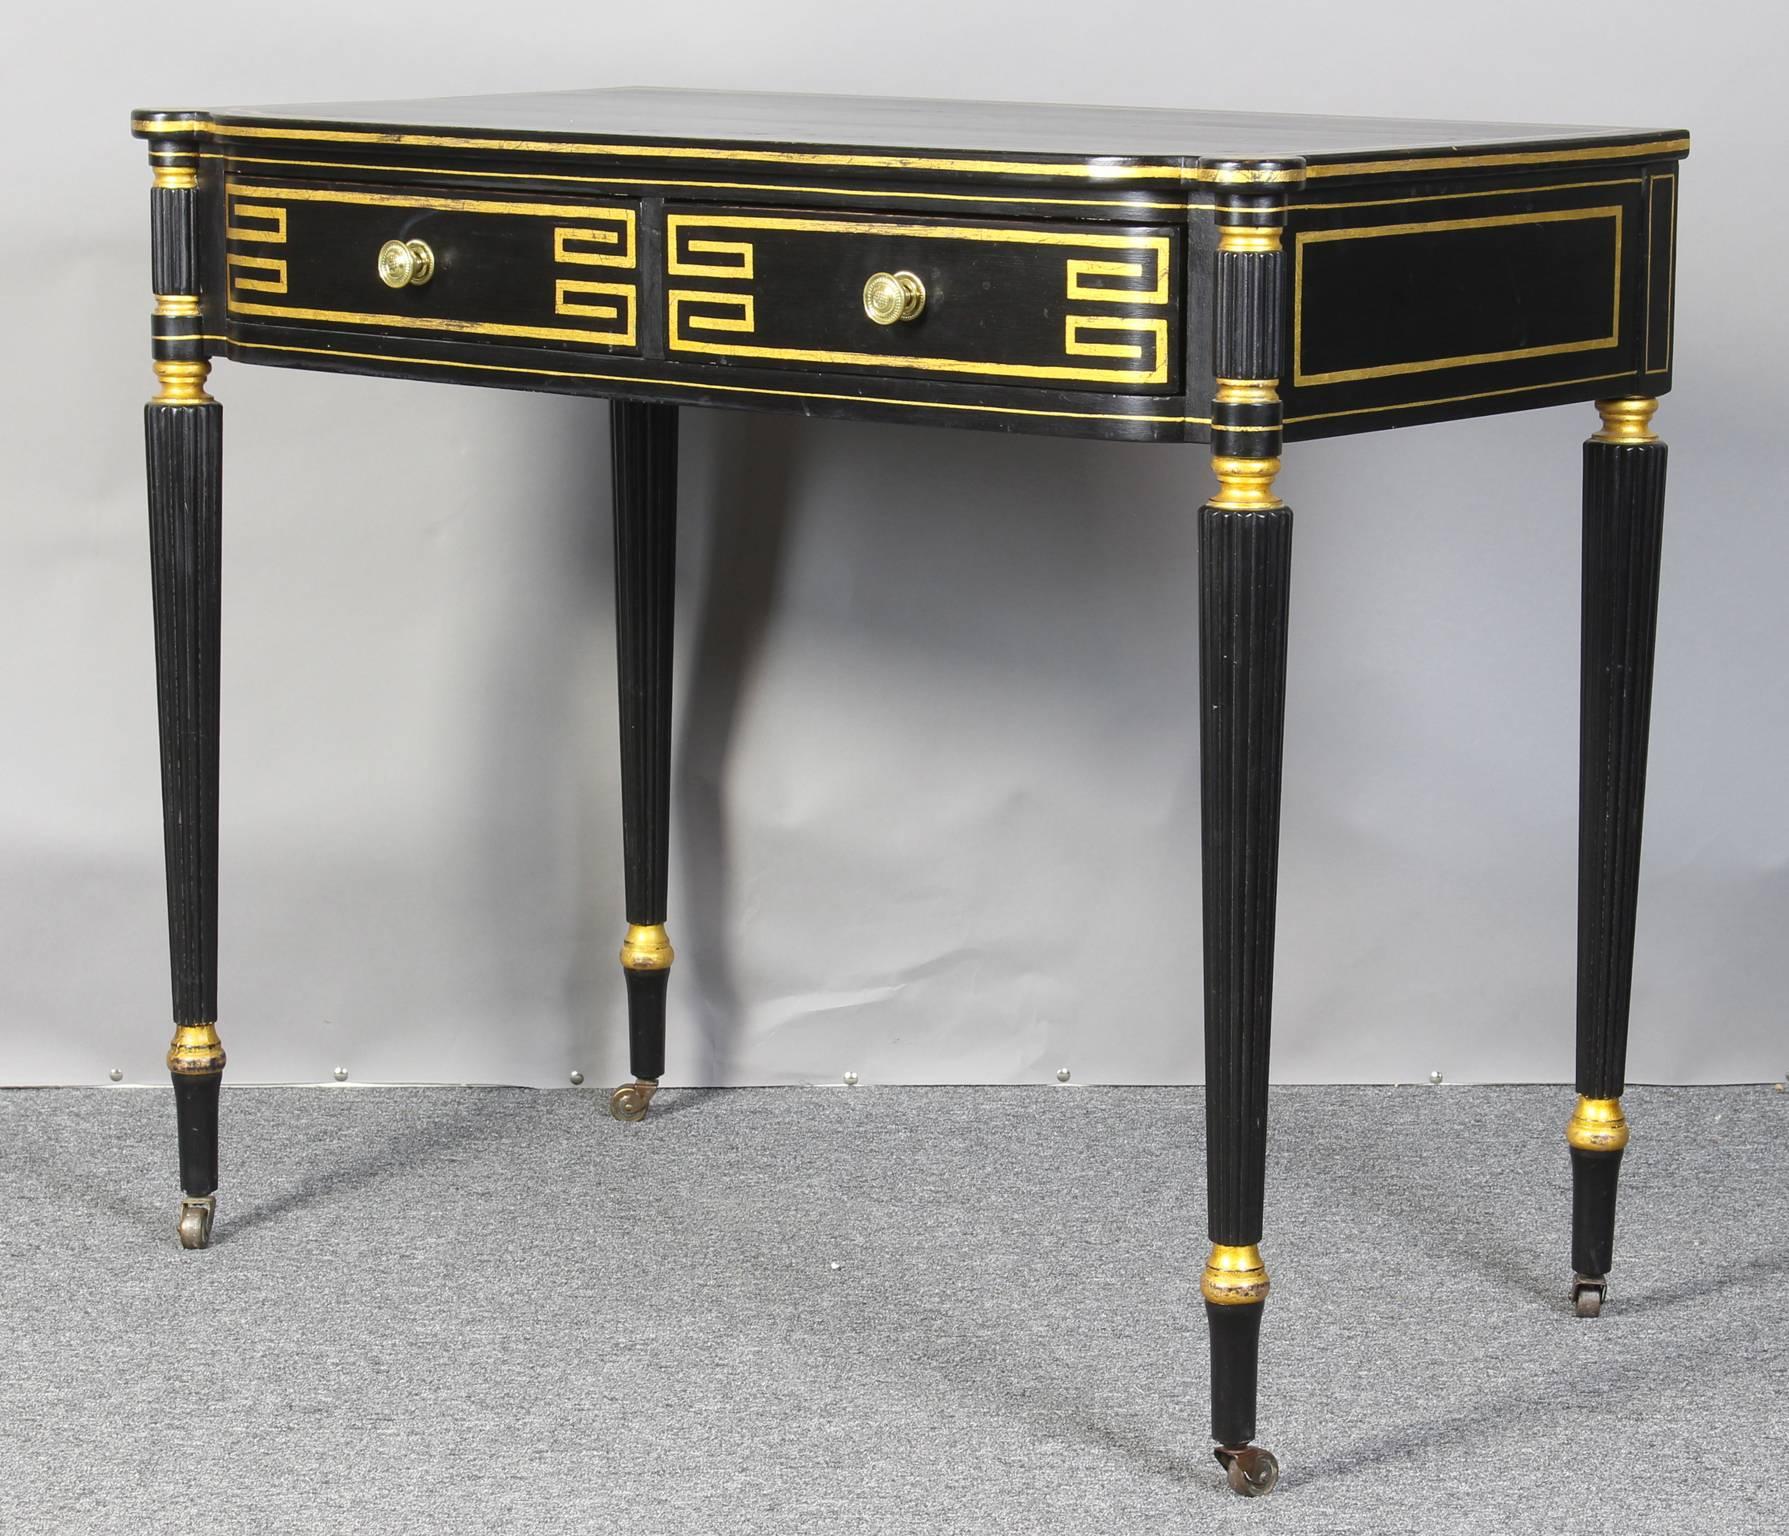 An elegant Regency style ebonized and gilt decorated console table having two drawers supported by reeded tapering legs terminating in casters.